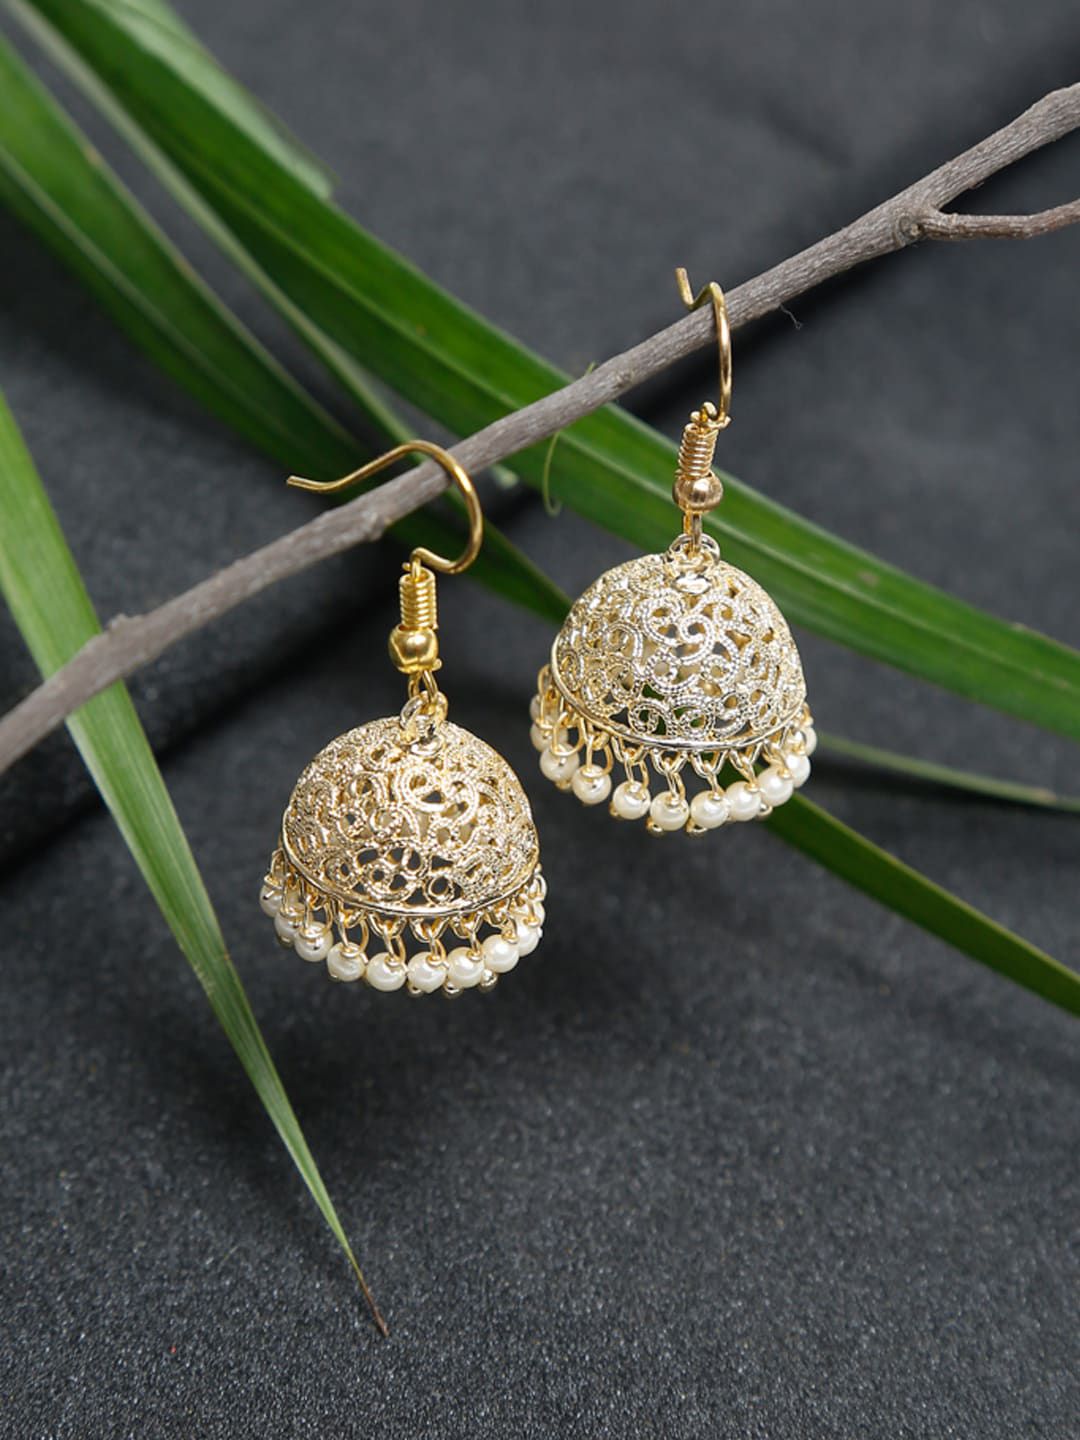 Ruby Raang Gold-Toned Dome Shaped Jhumkas Earrings Price in India